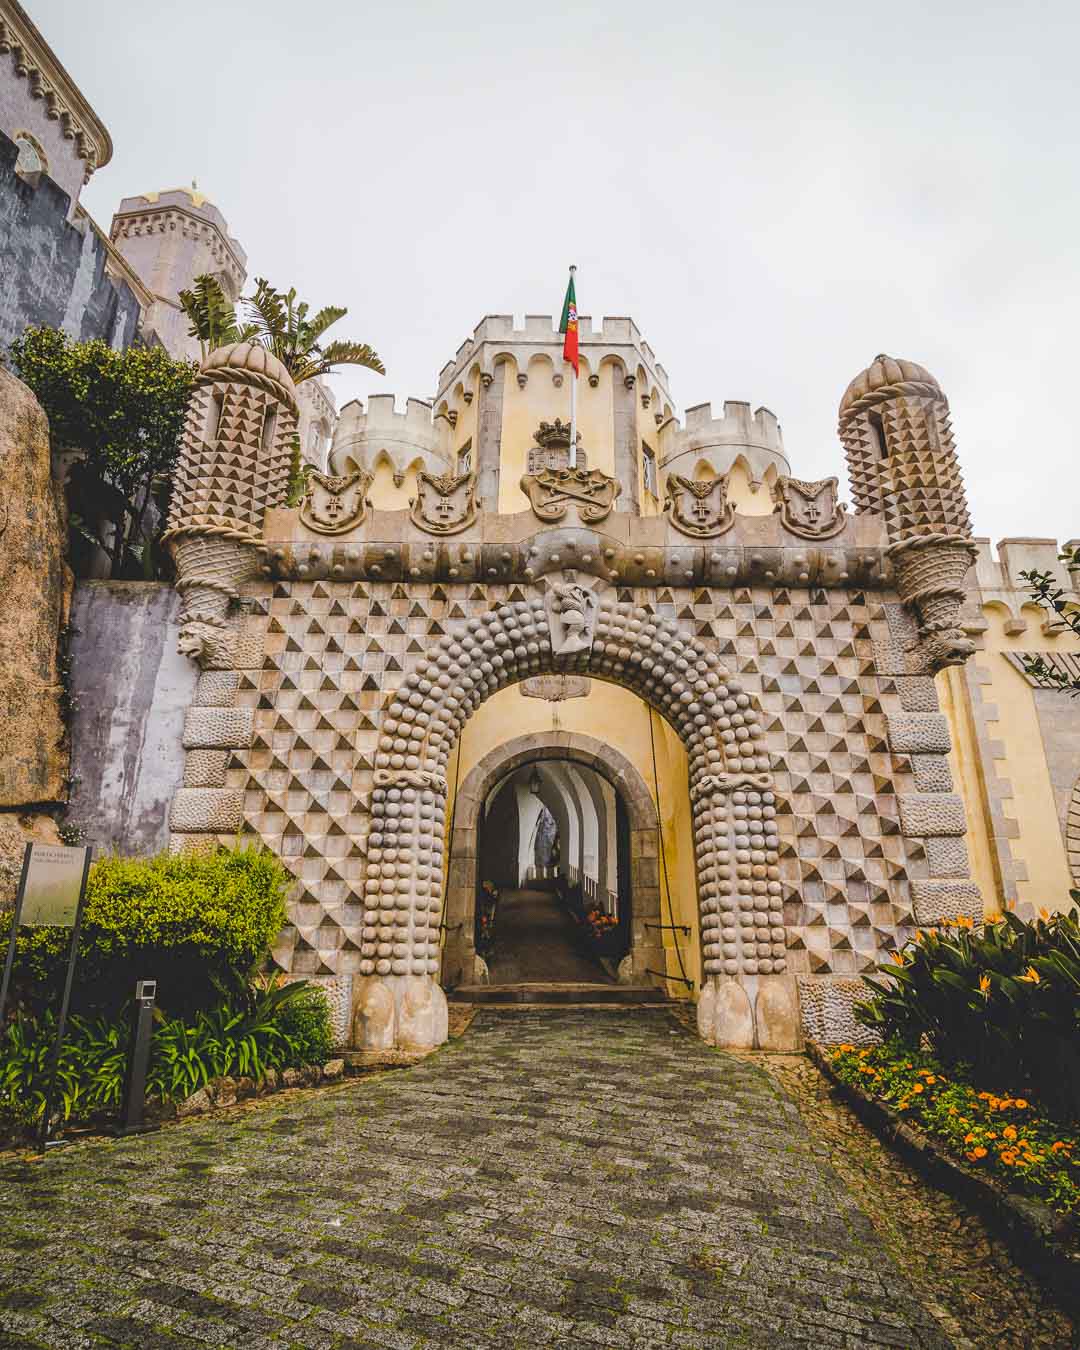 the entry of pena palace